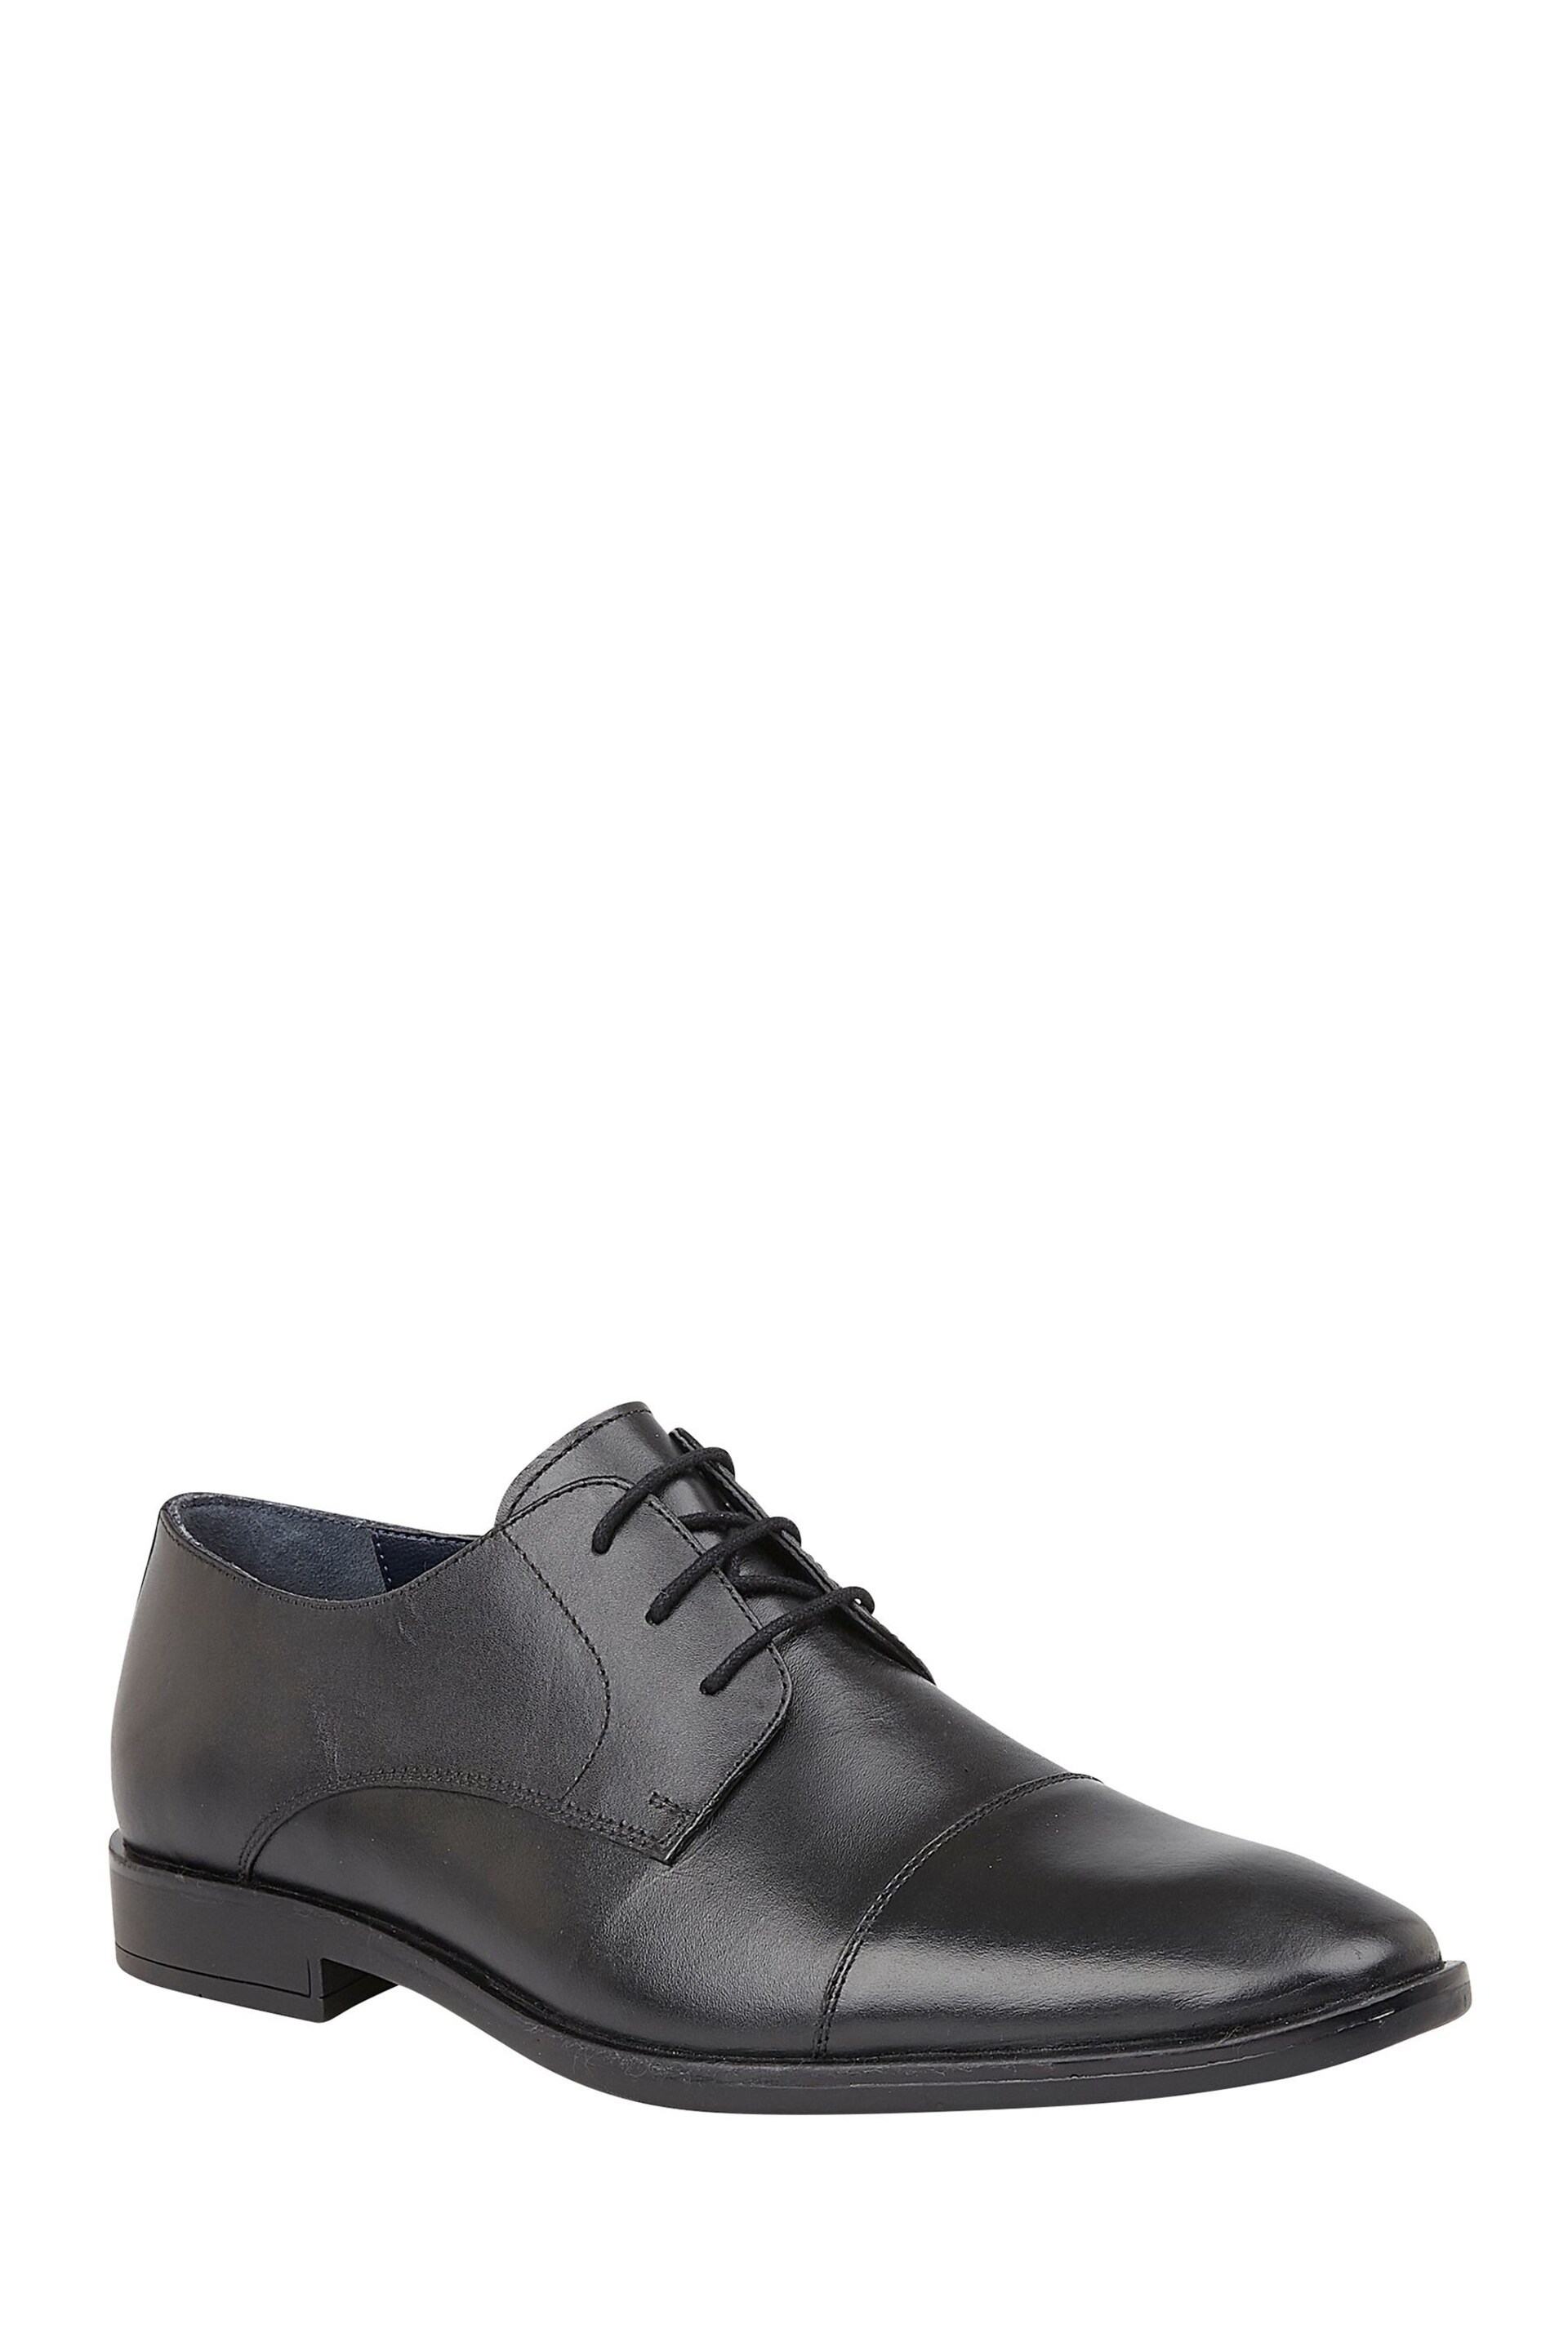 Lotus Onyx Black Leather Derby Shoes - Image 1 of 4